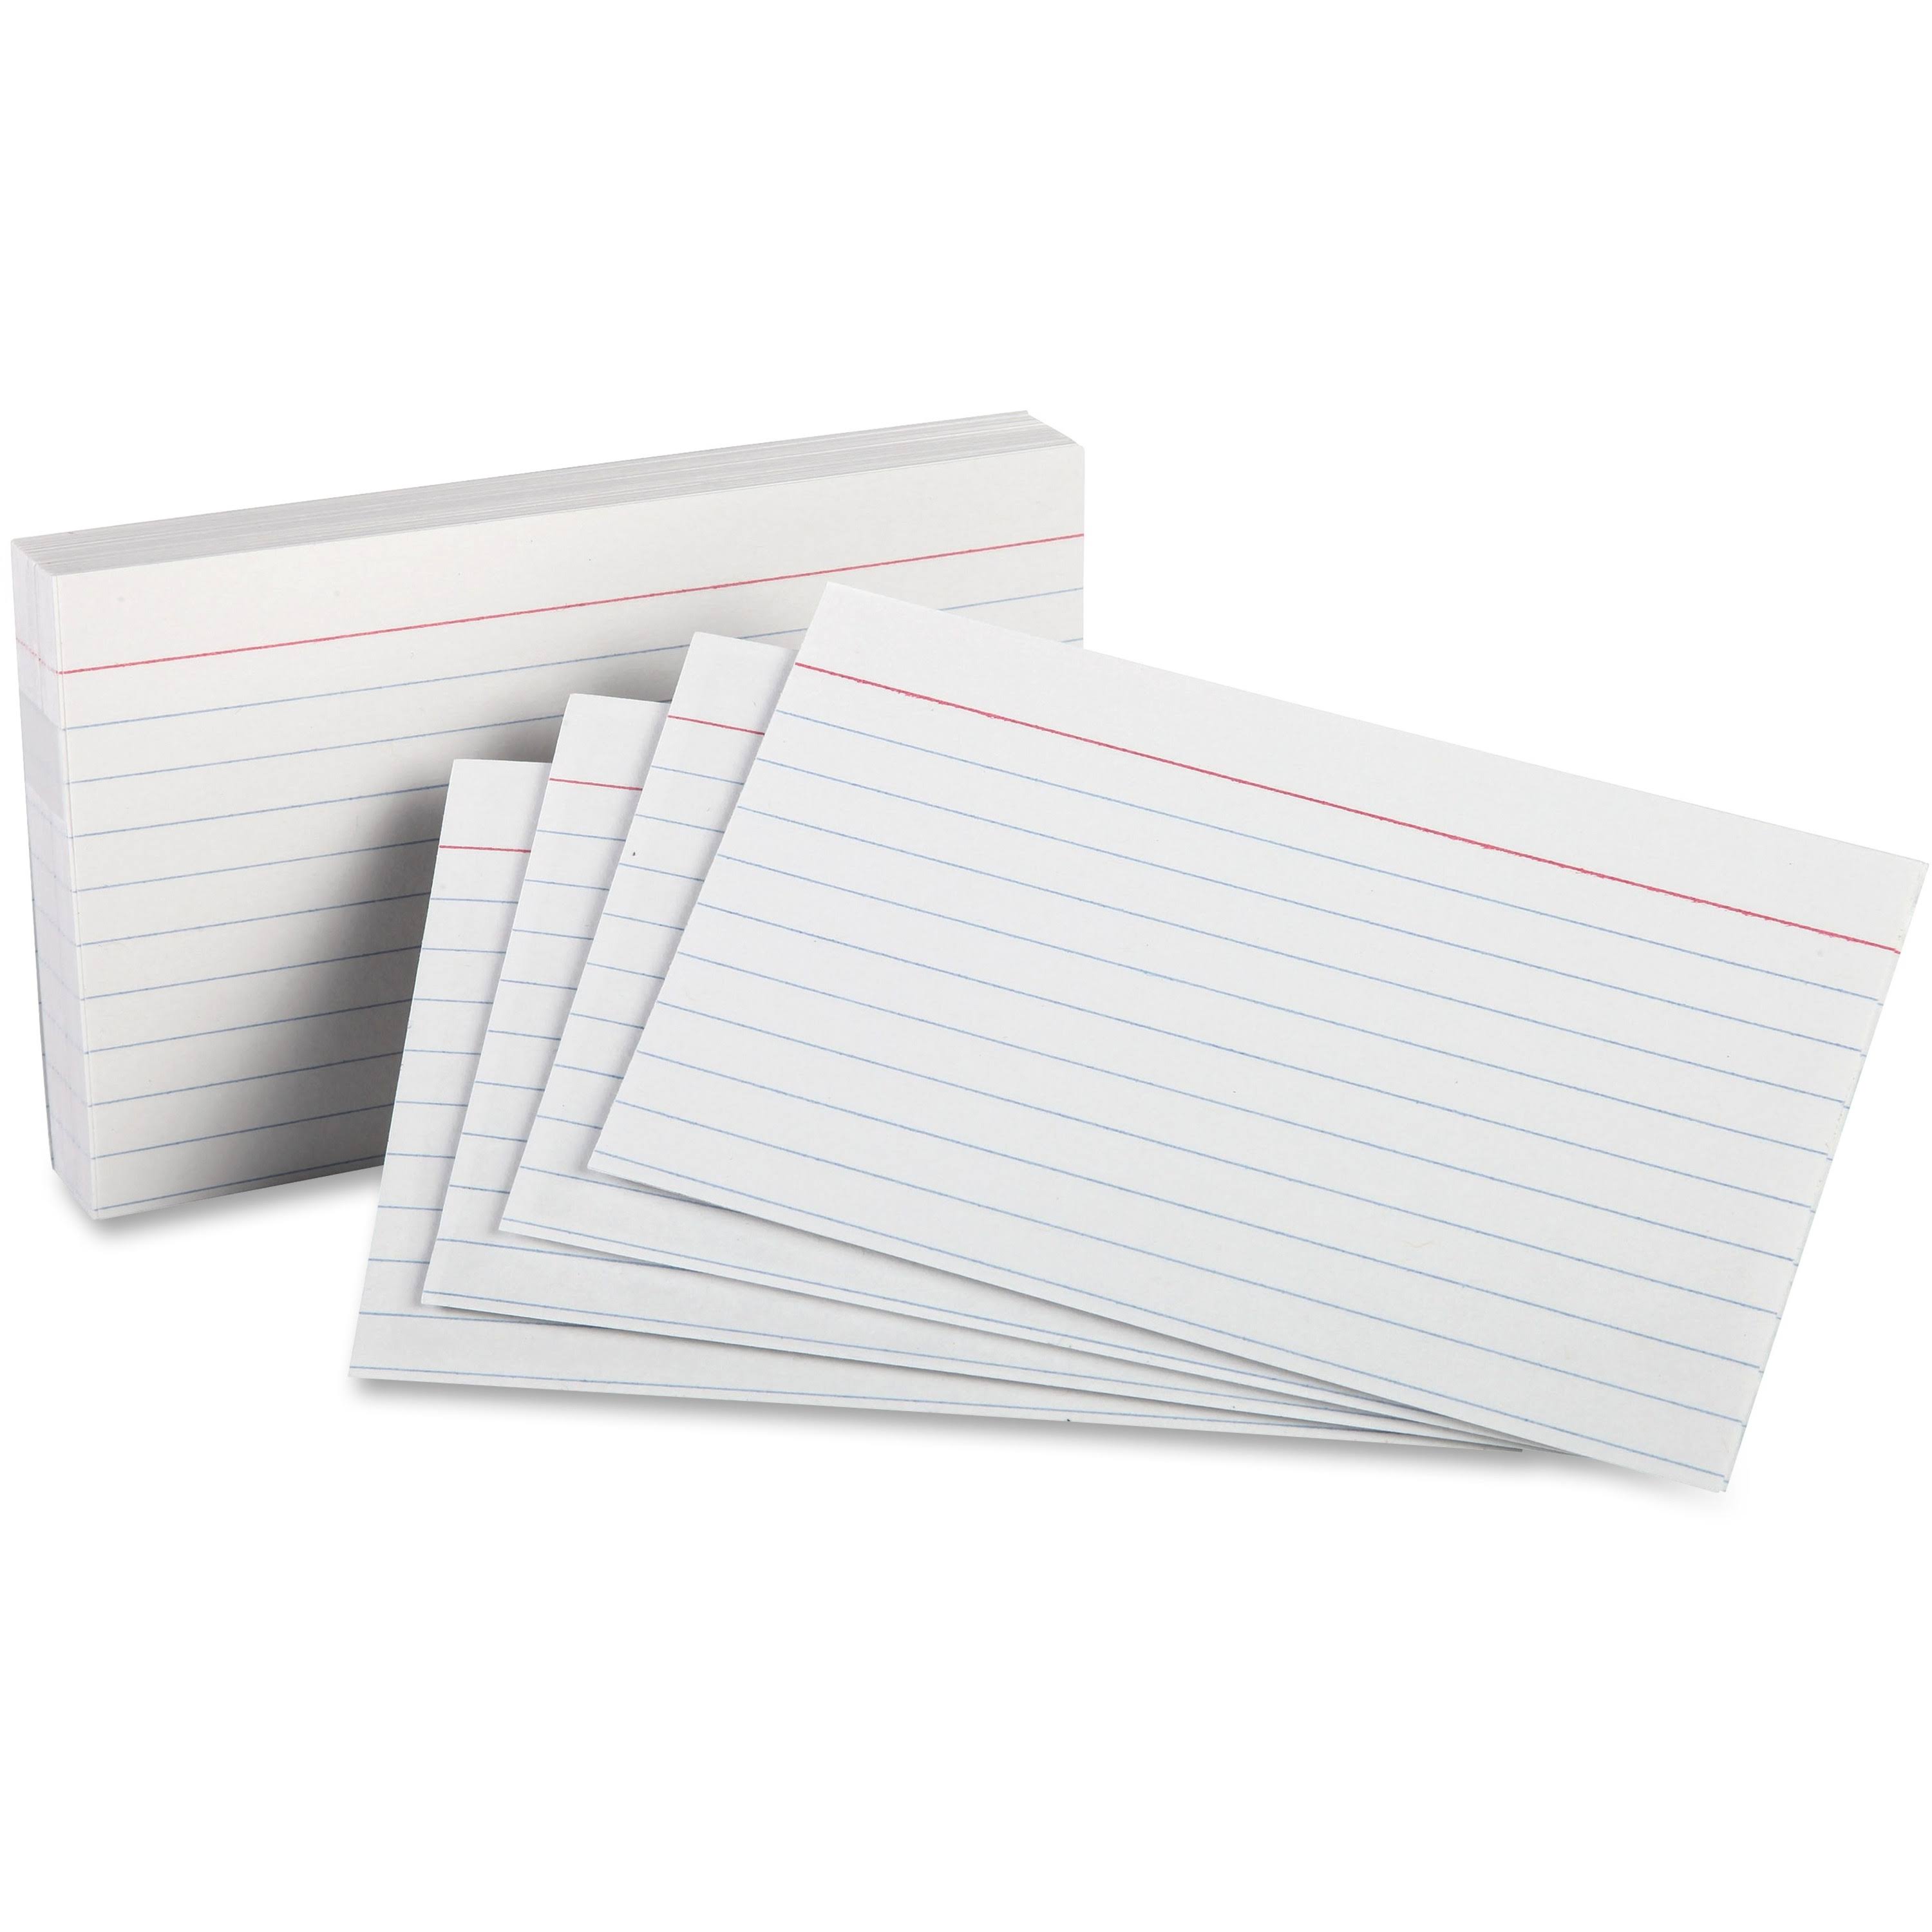 Oxford 31 Ruled Index Cards - 3" x 5", White, 100 Cards